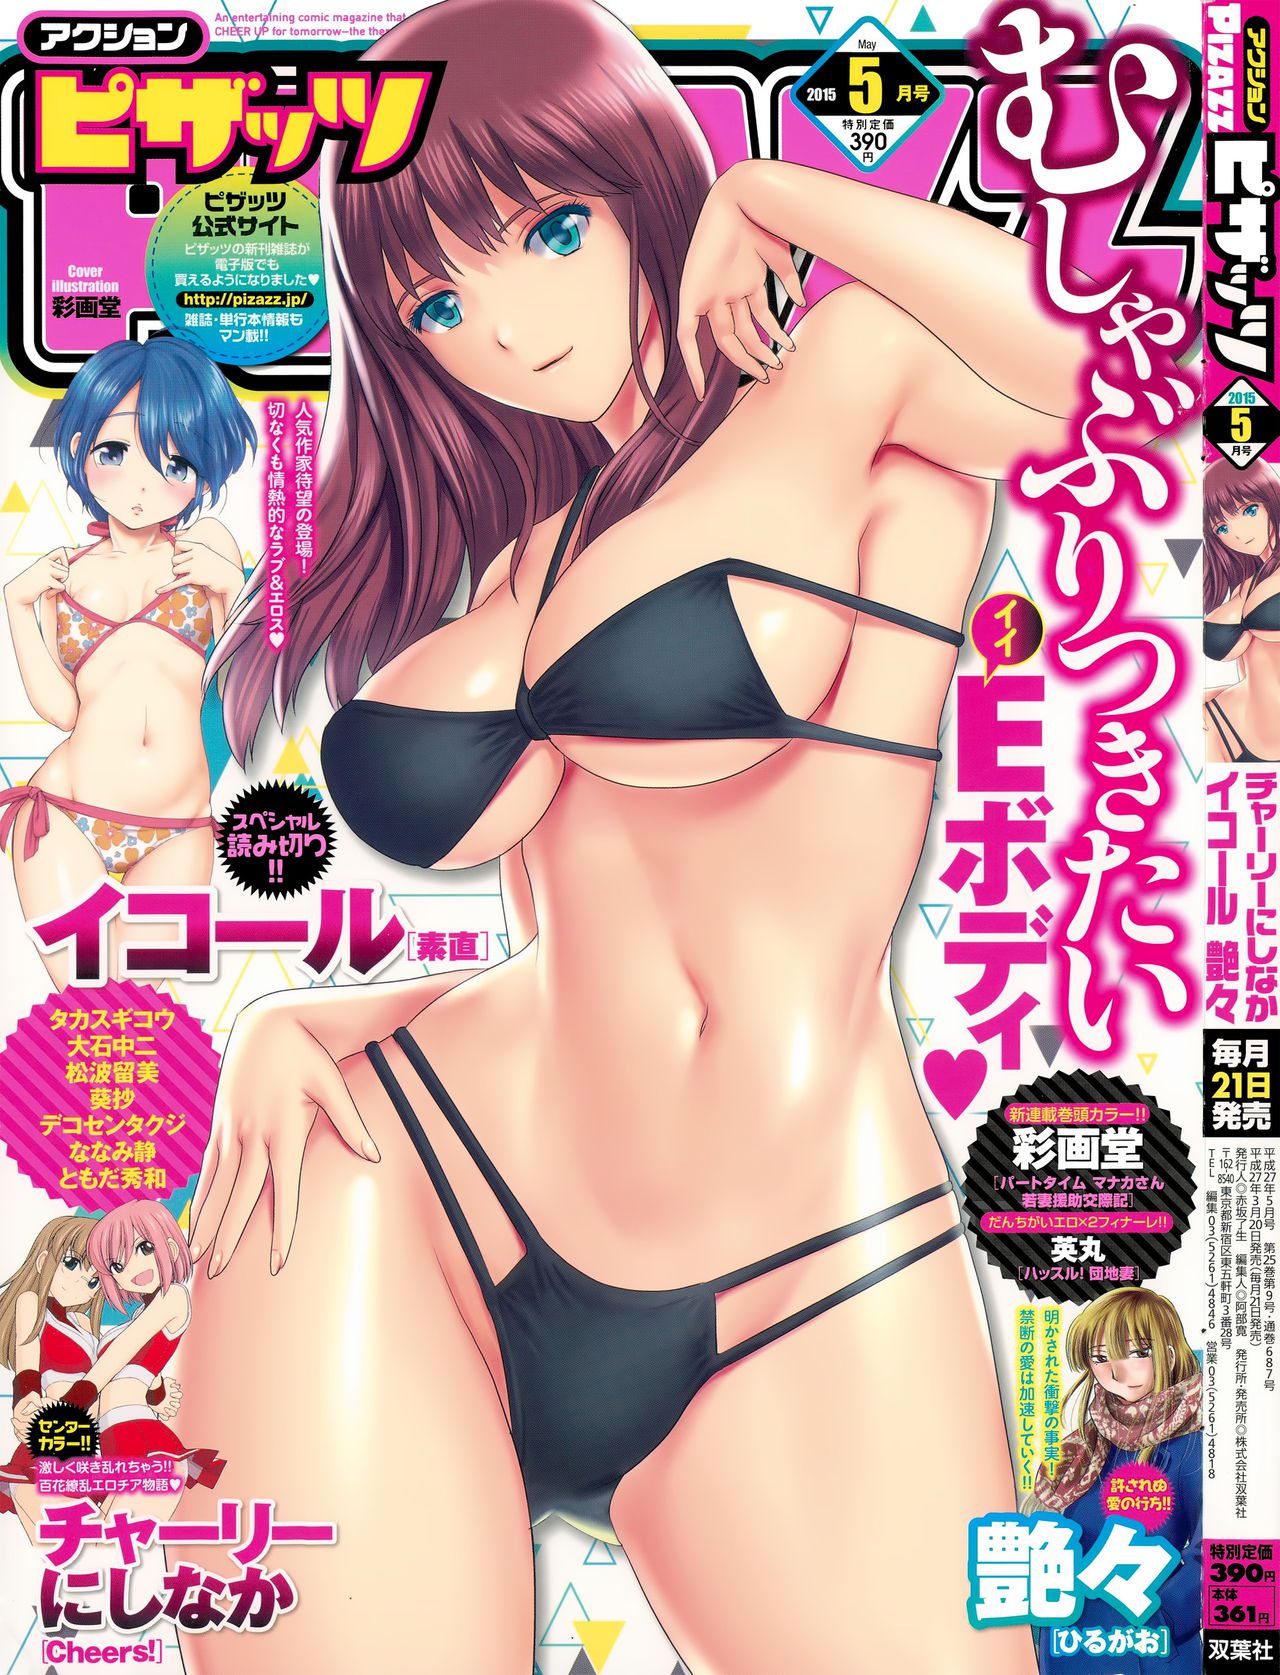 [Saigado] Cover Illustrations [彩画堂] Cover Illustrations 87